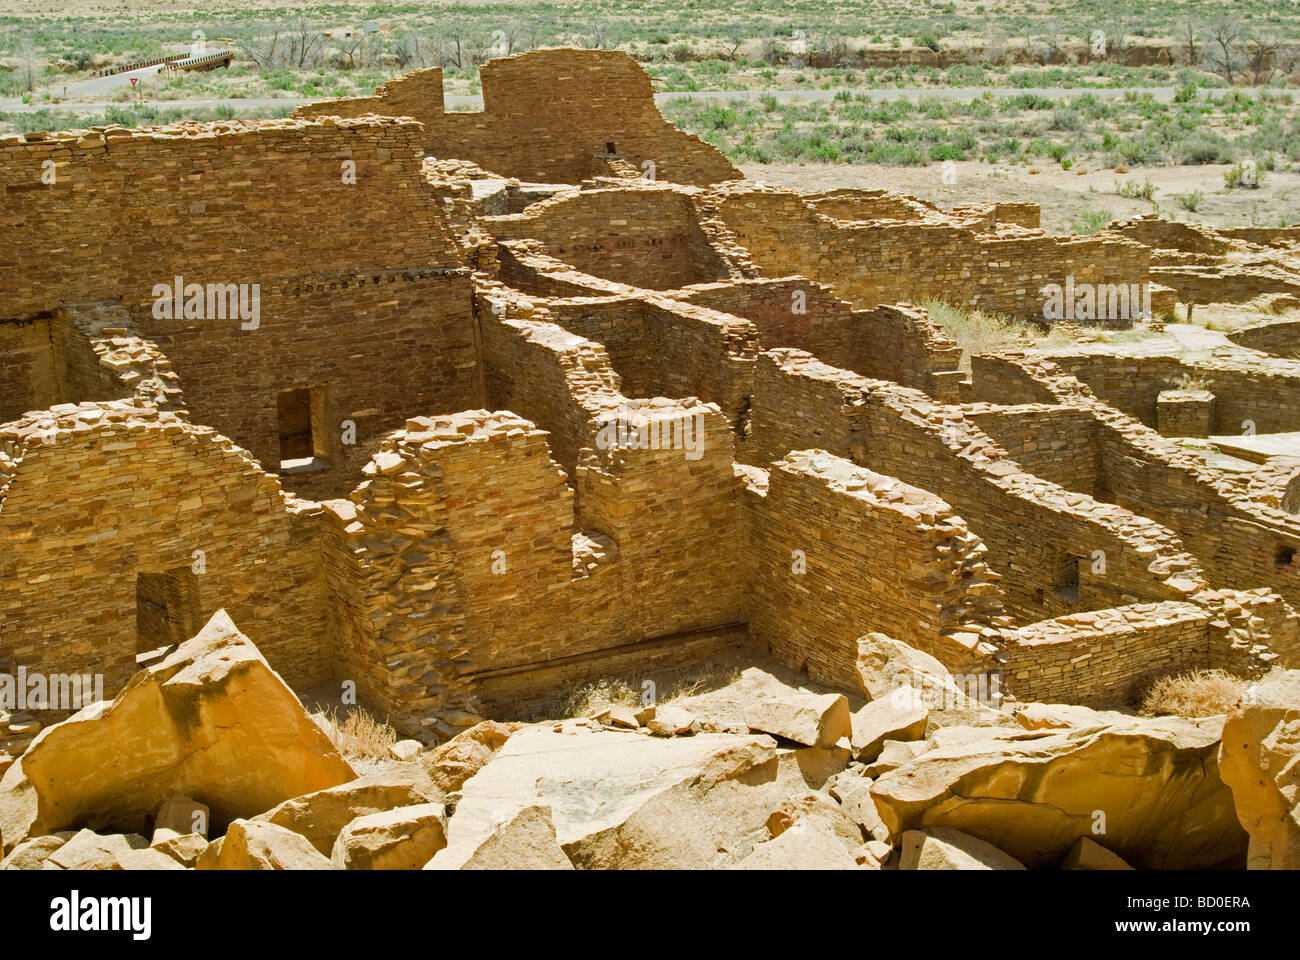 Ruins, Chaco Culture National Historical Park, New Mexico Stock Photo